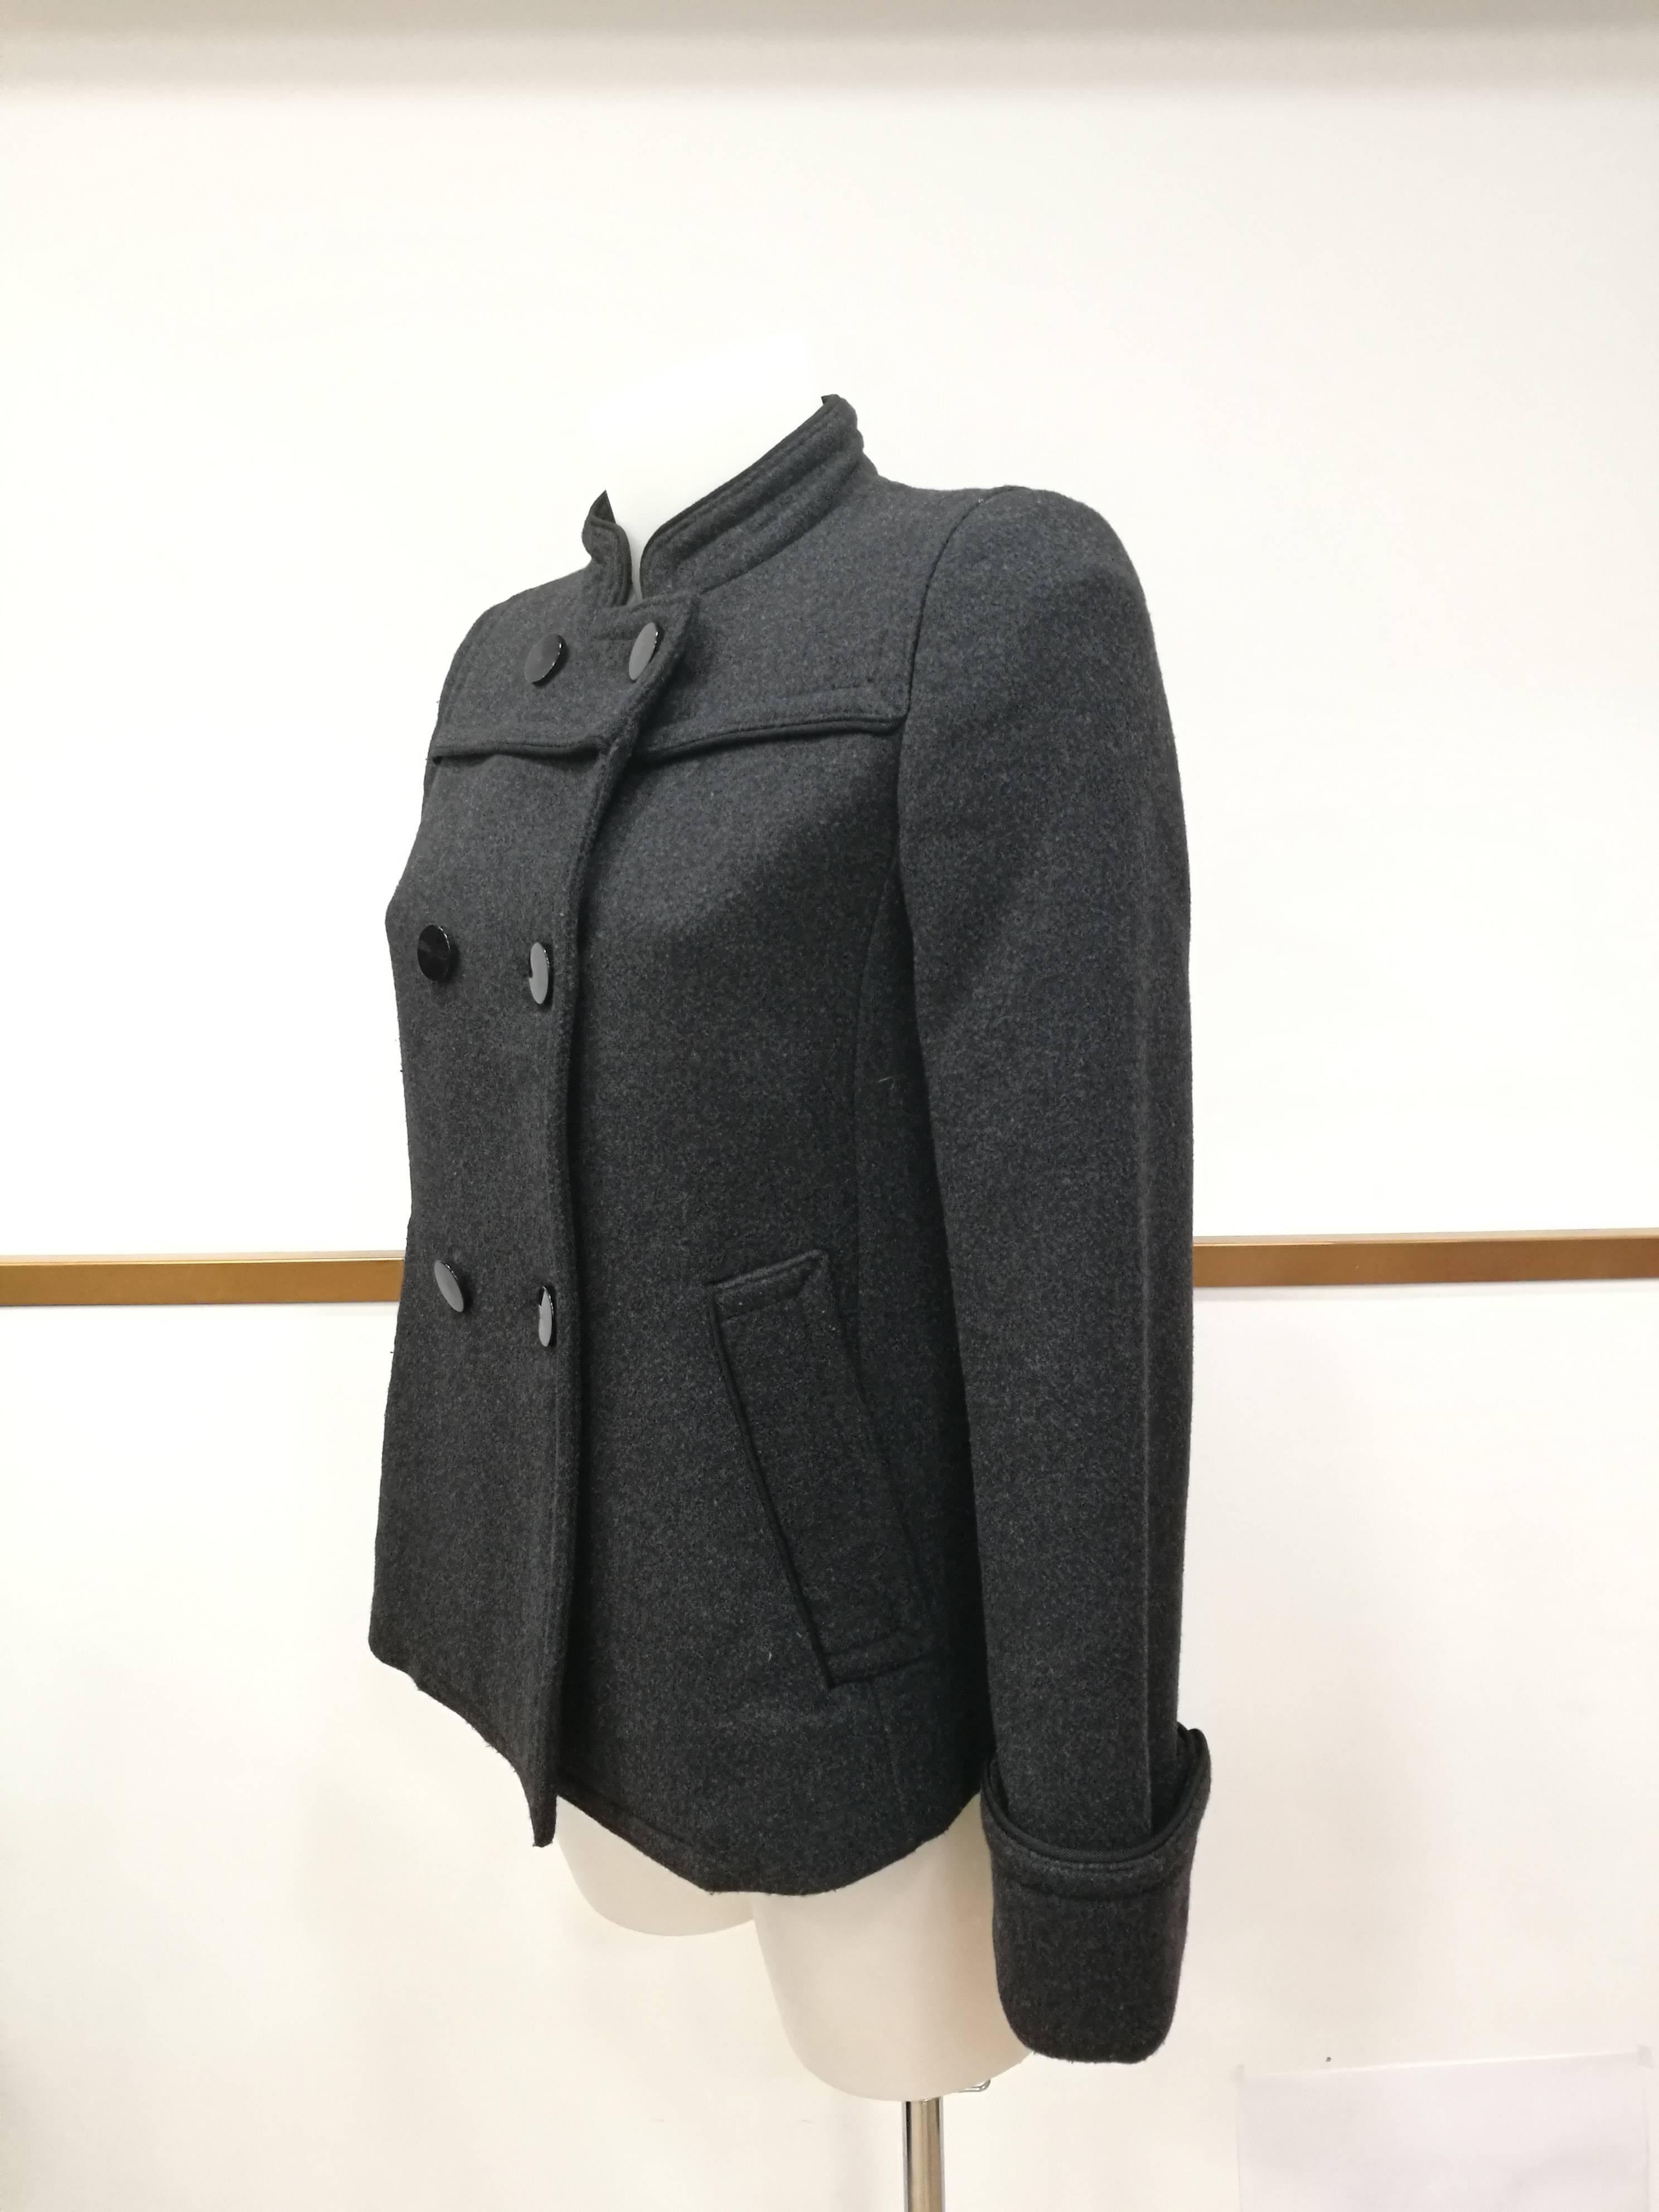 Red Valentino Virgin Wool Grey Coat

Totally made in italy in standard size range S

Composition: 80 wool 20 polyammide